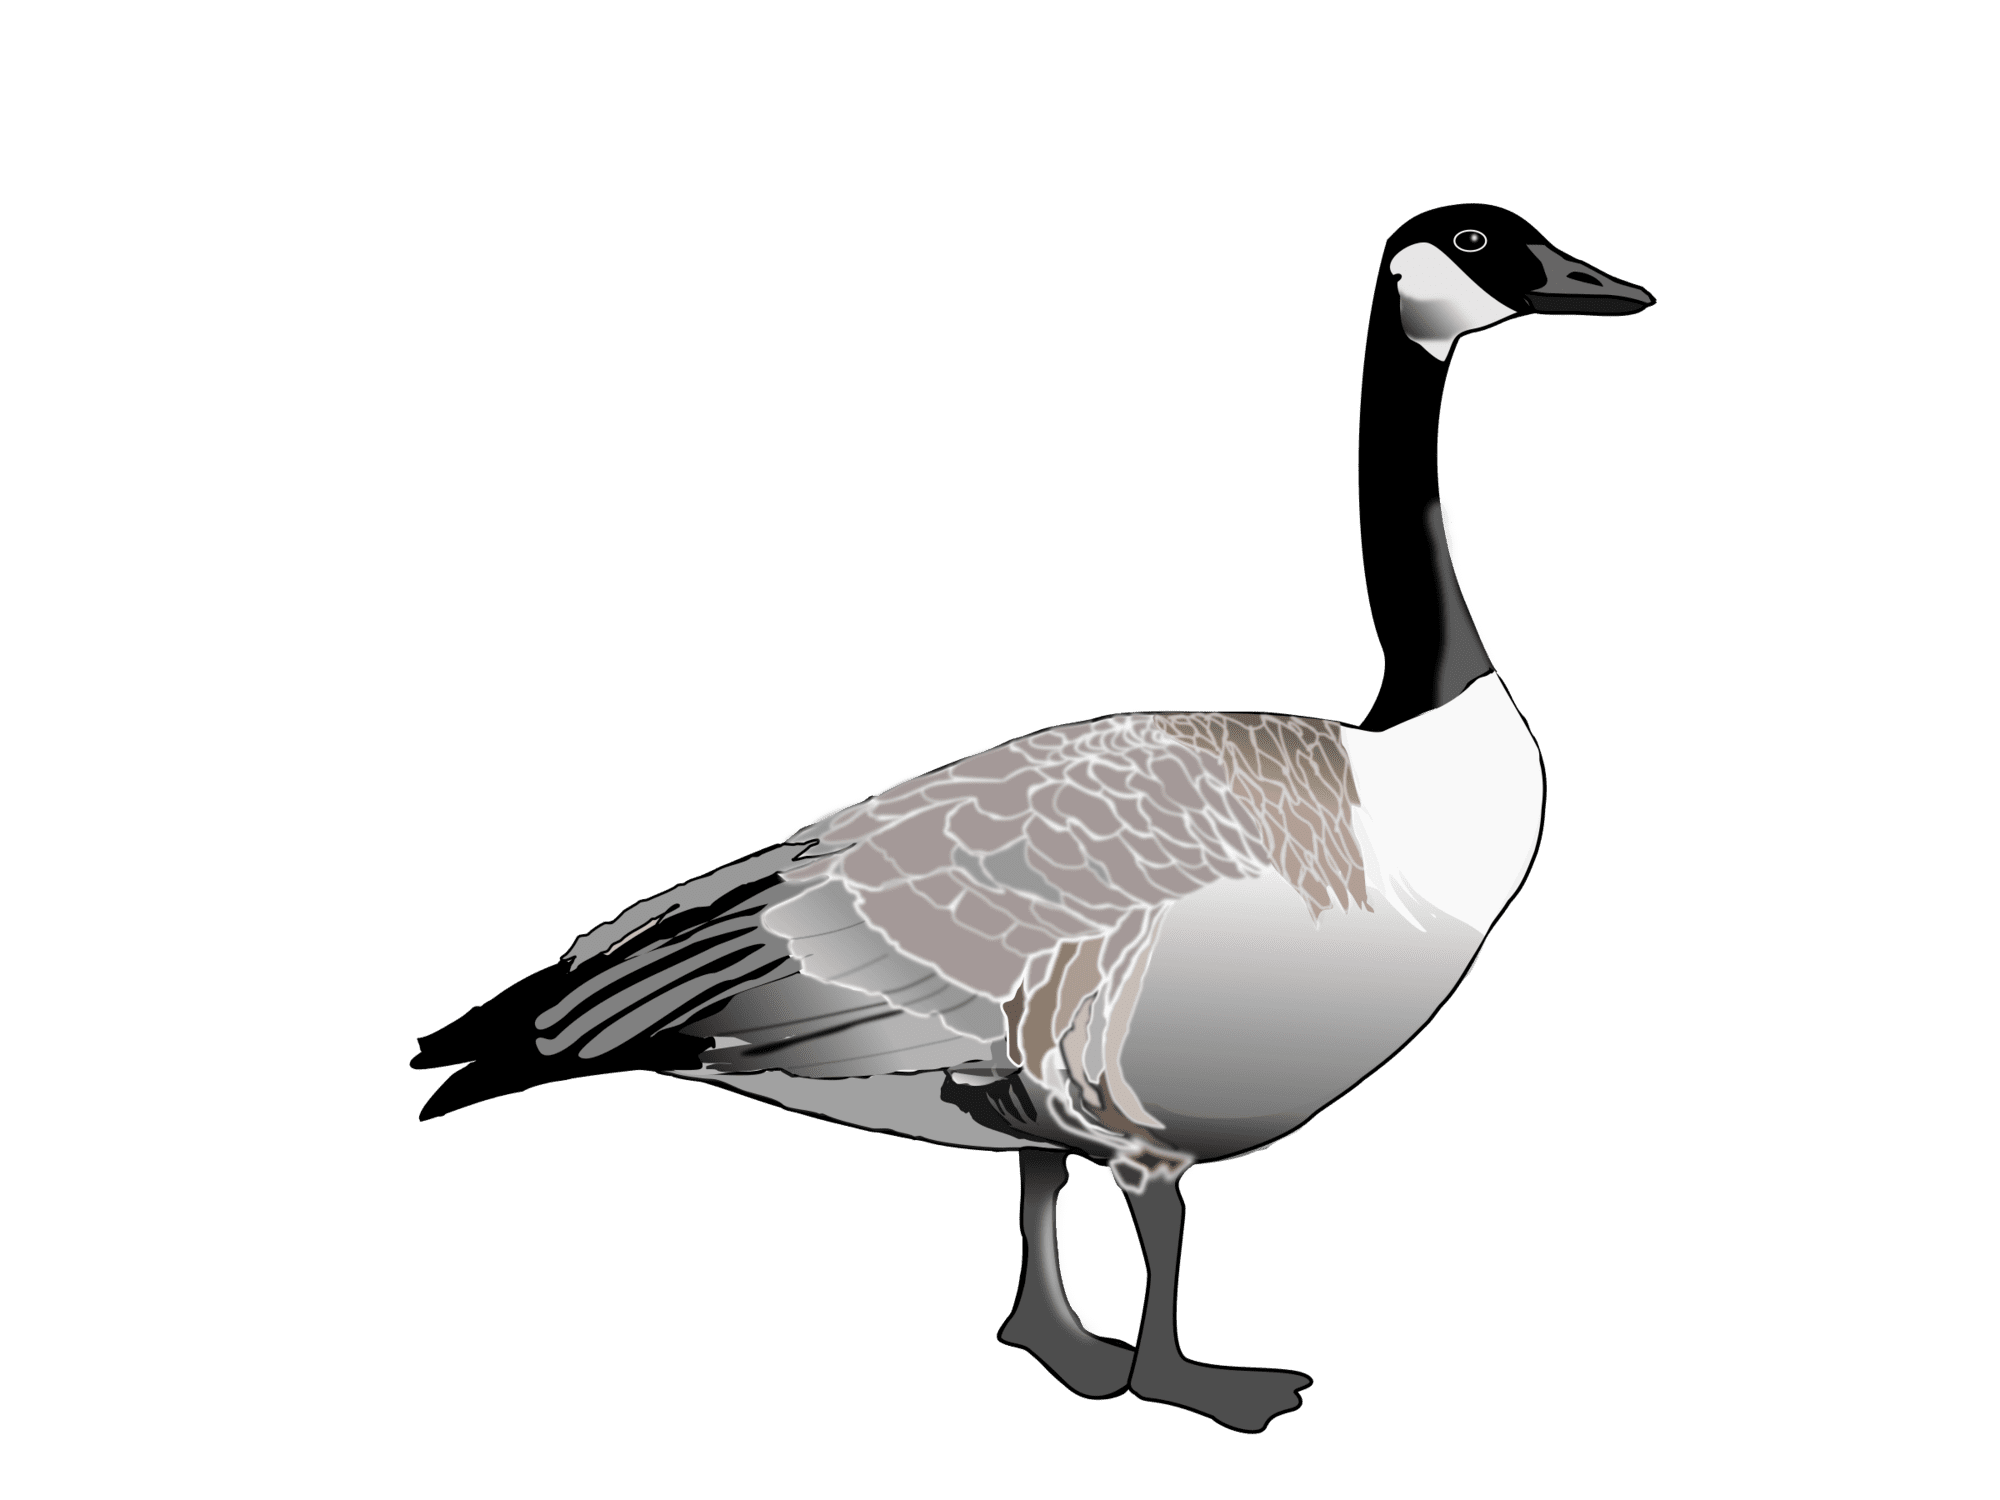 Goose image size clipart